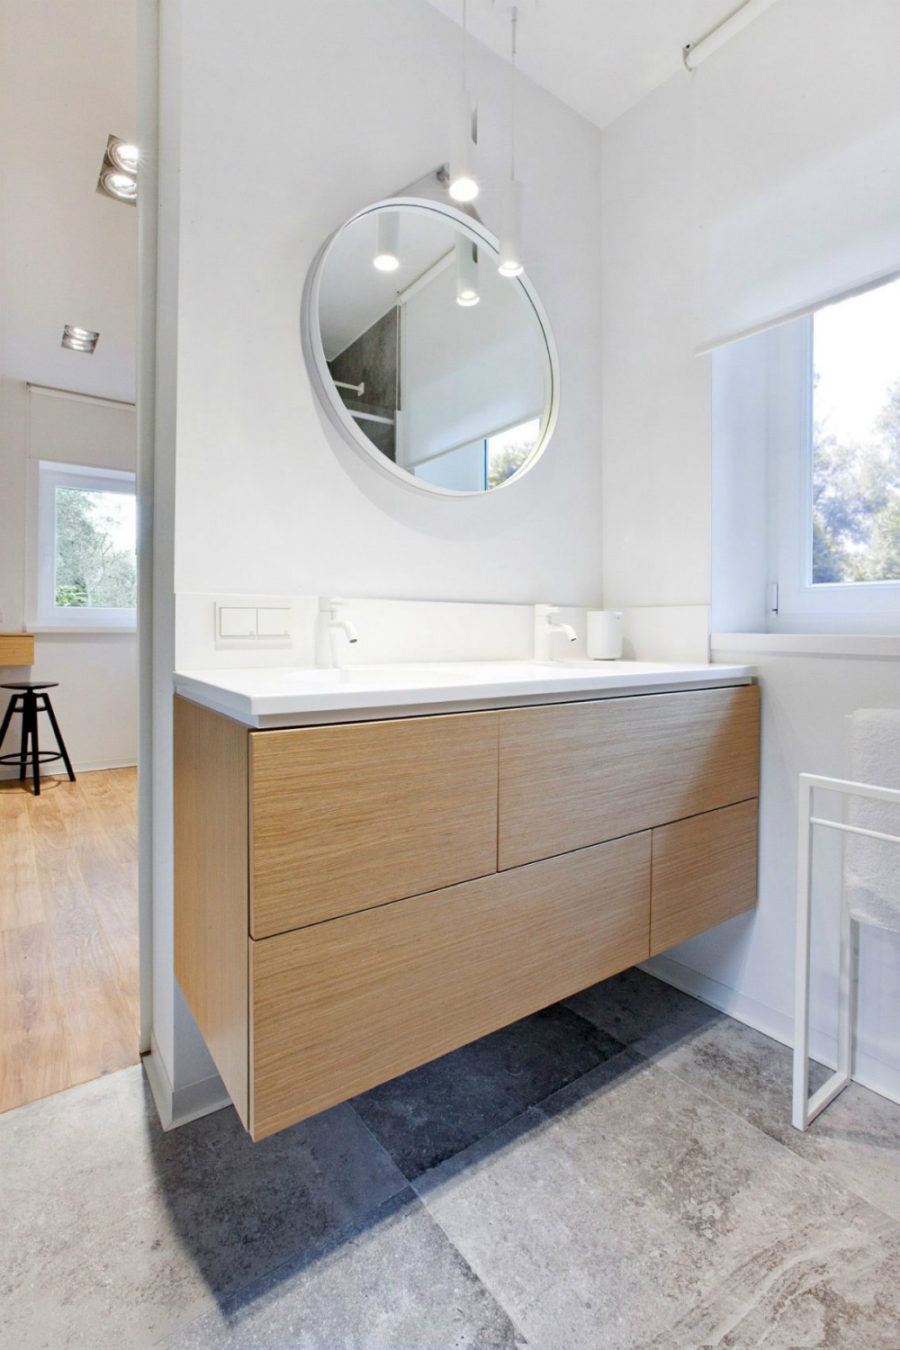 Modest bathroom echoes the kitchen with white hardware